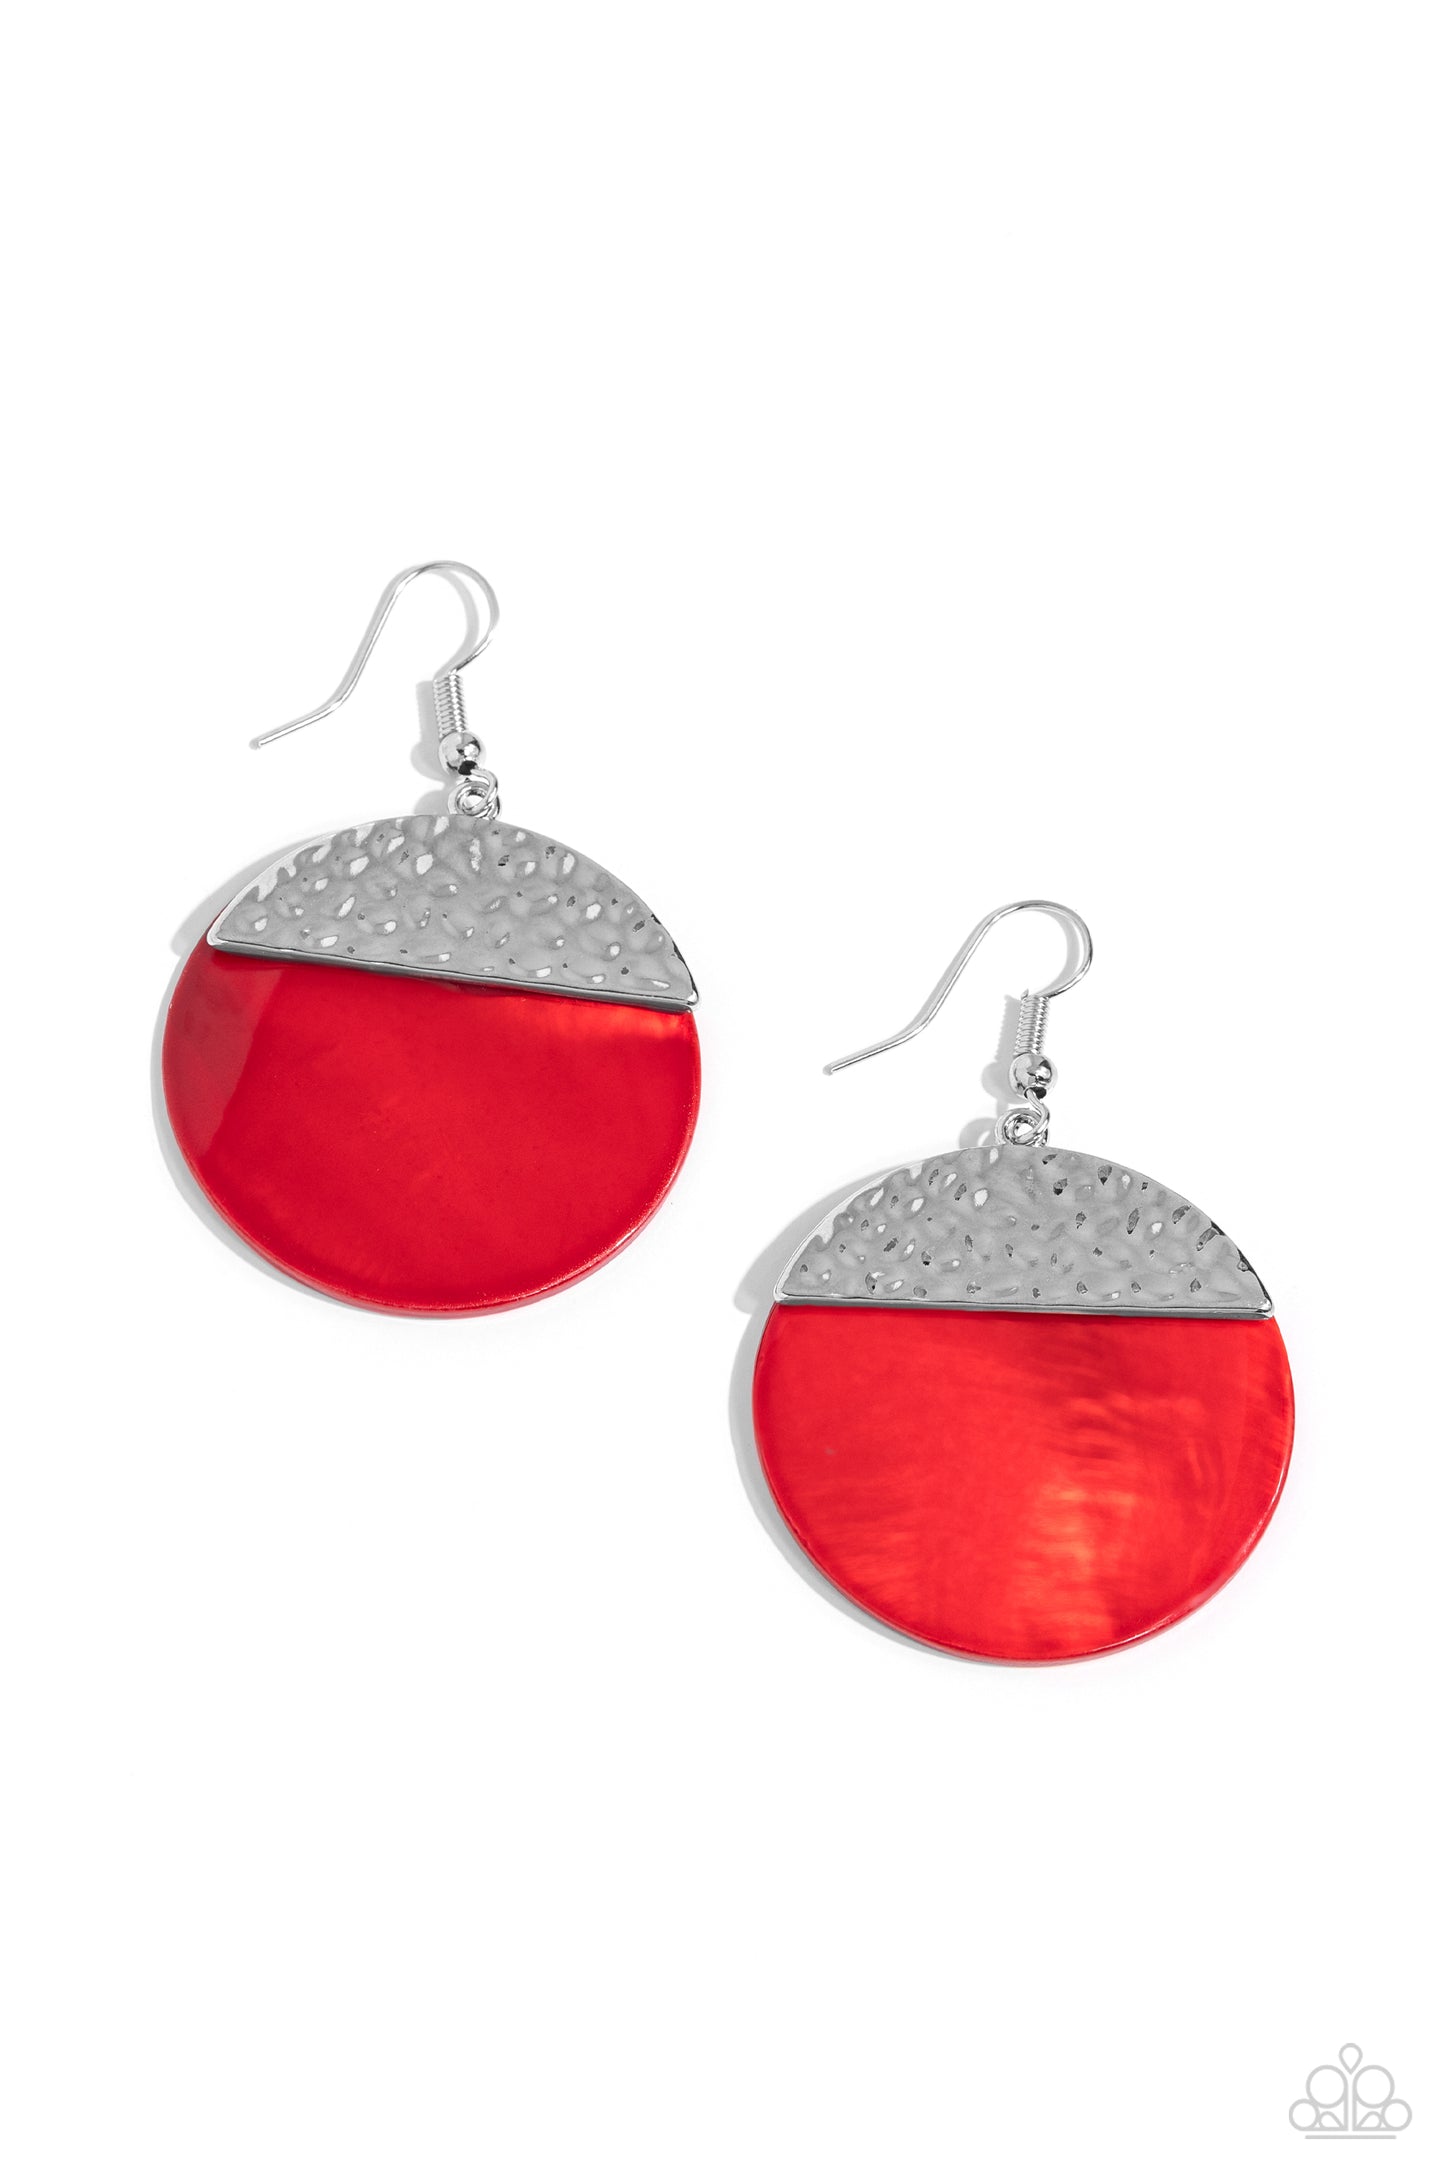 <p>Flat, oversized, red shell discs swing from the ear for a deceptively simple, beach-inspired statement. Prominently featured at the top of the shell setting, a hammered, half-moon of silver rests for an industrial shimmer to the whimsical design. Earring attaches to a standard fishhook fitting.</p> <p><i> Sold as one pair of earrings.</i></p>